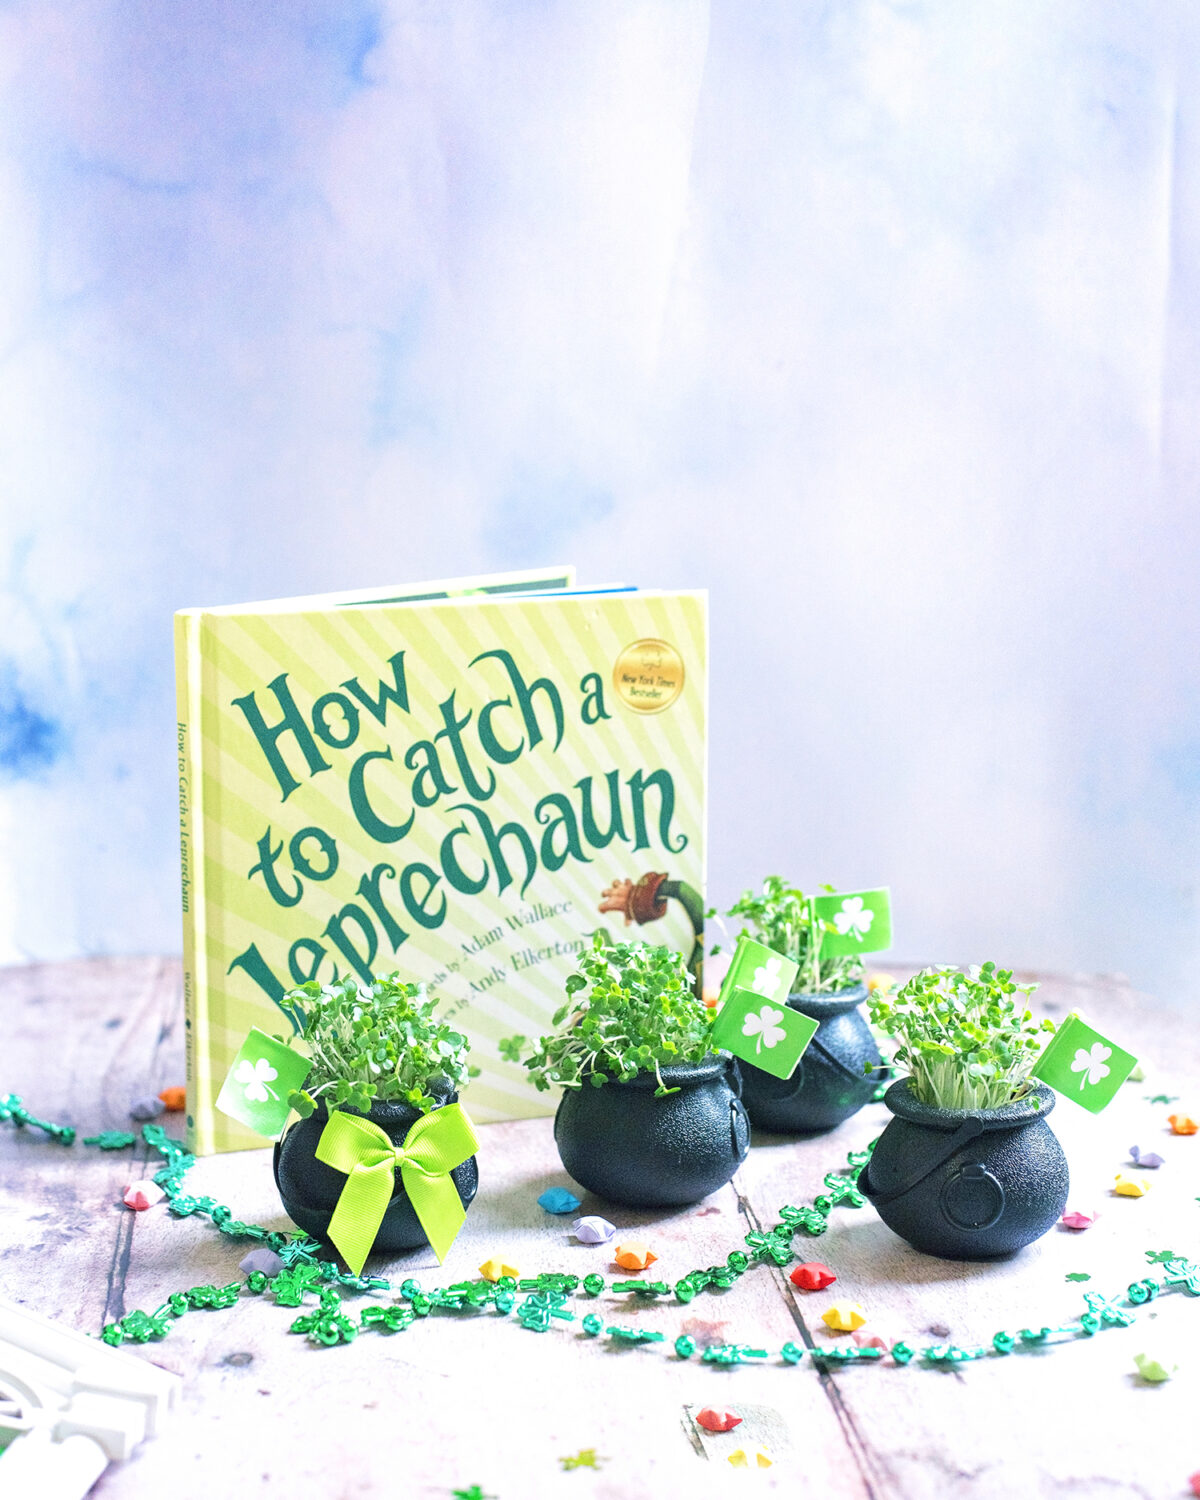 Ways to celebrate St. patrick's day at home. Easy, step by step tutorial for edible cress pots instead of shamrock pots